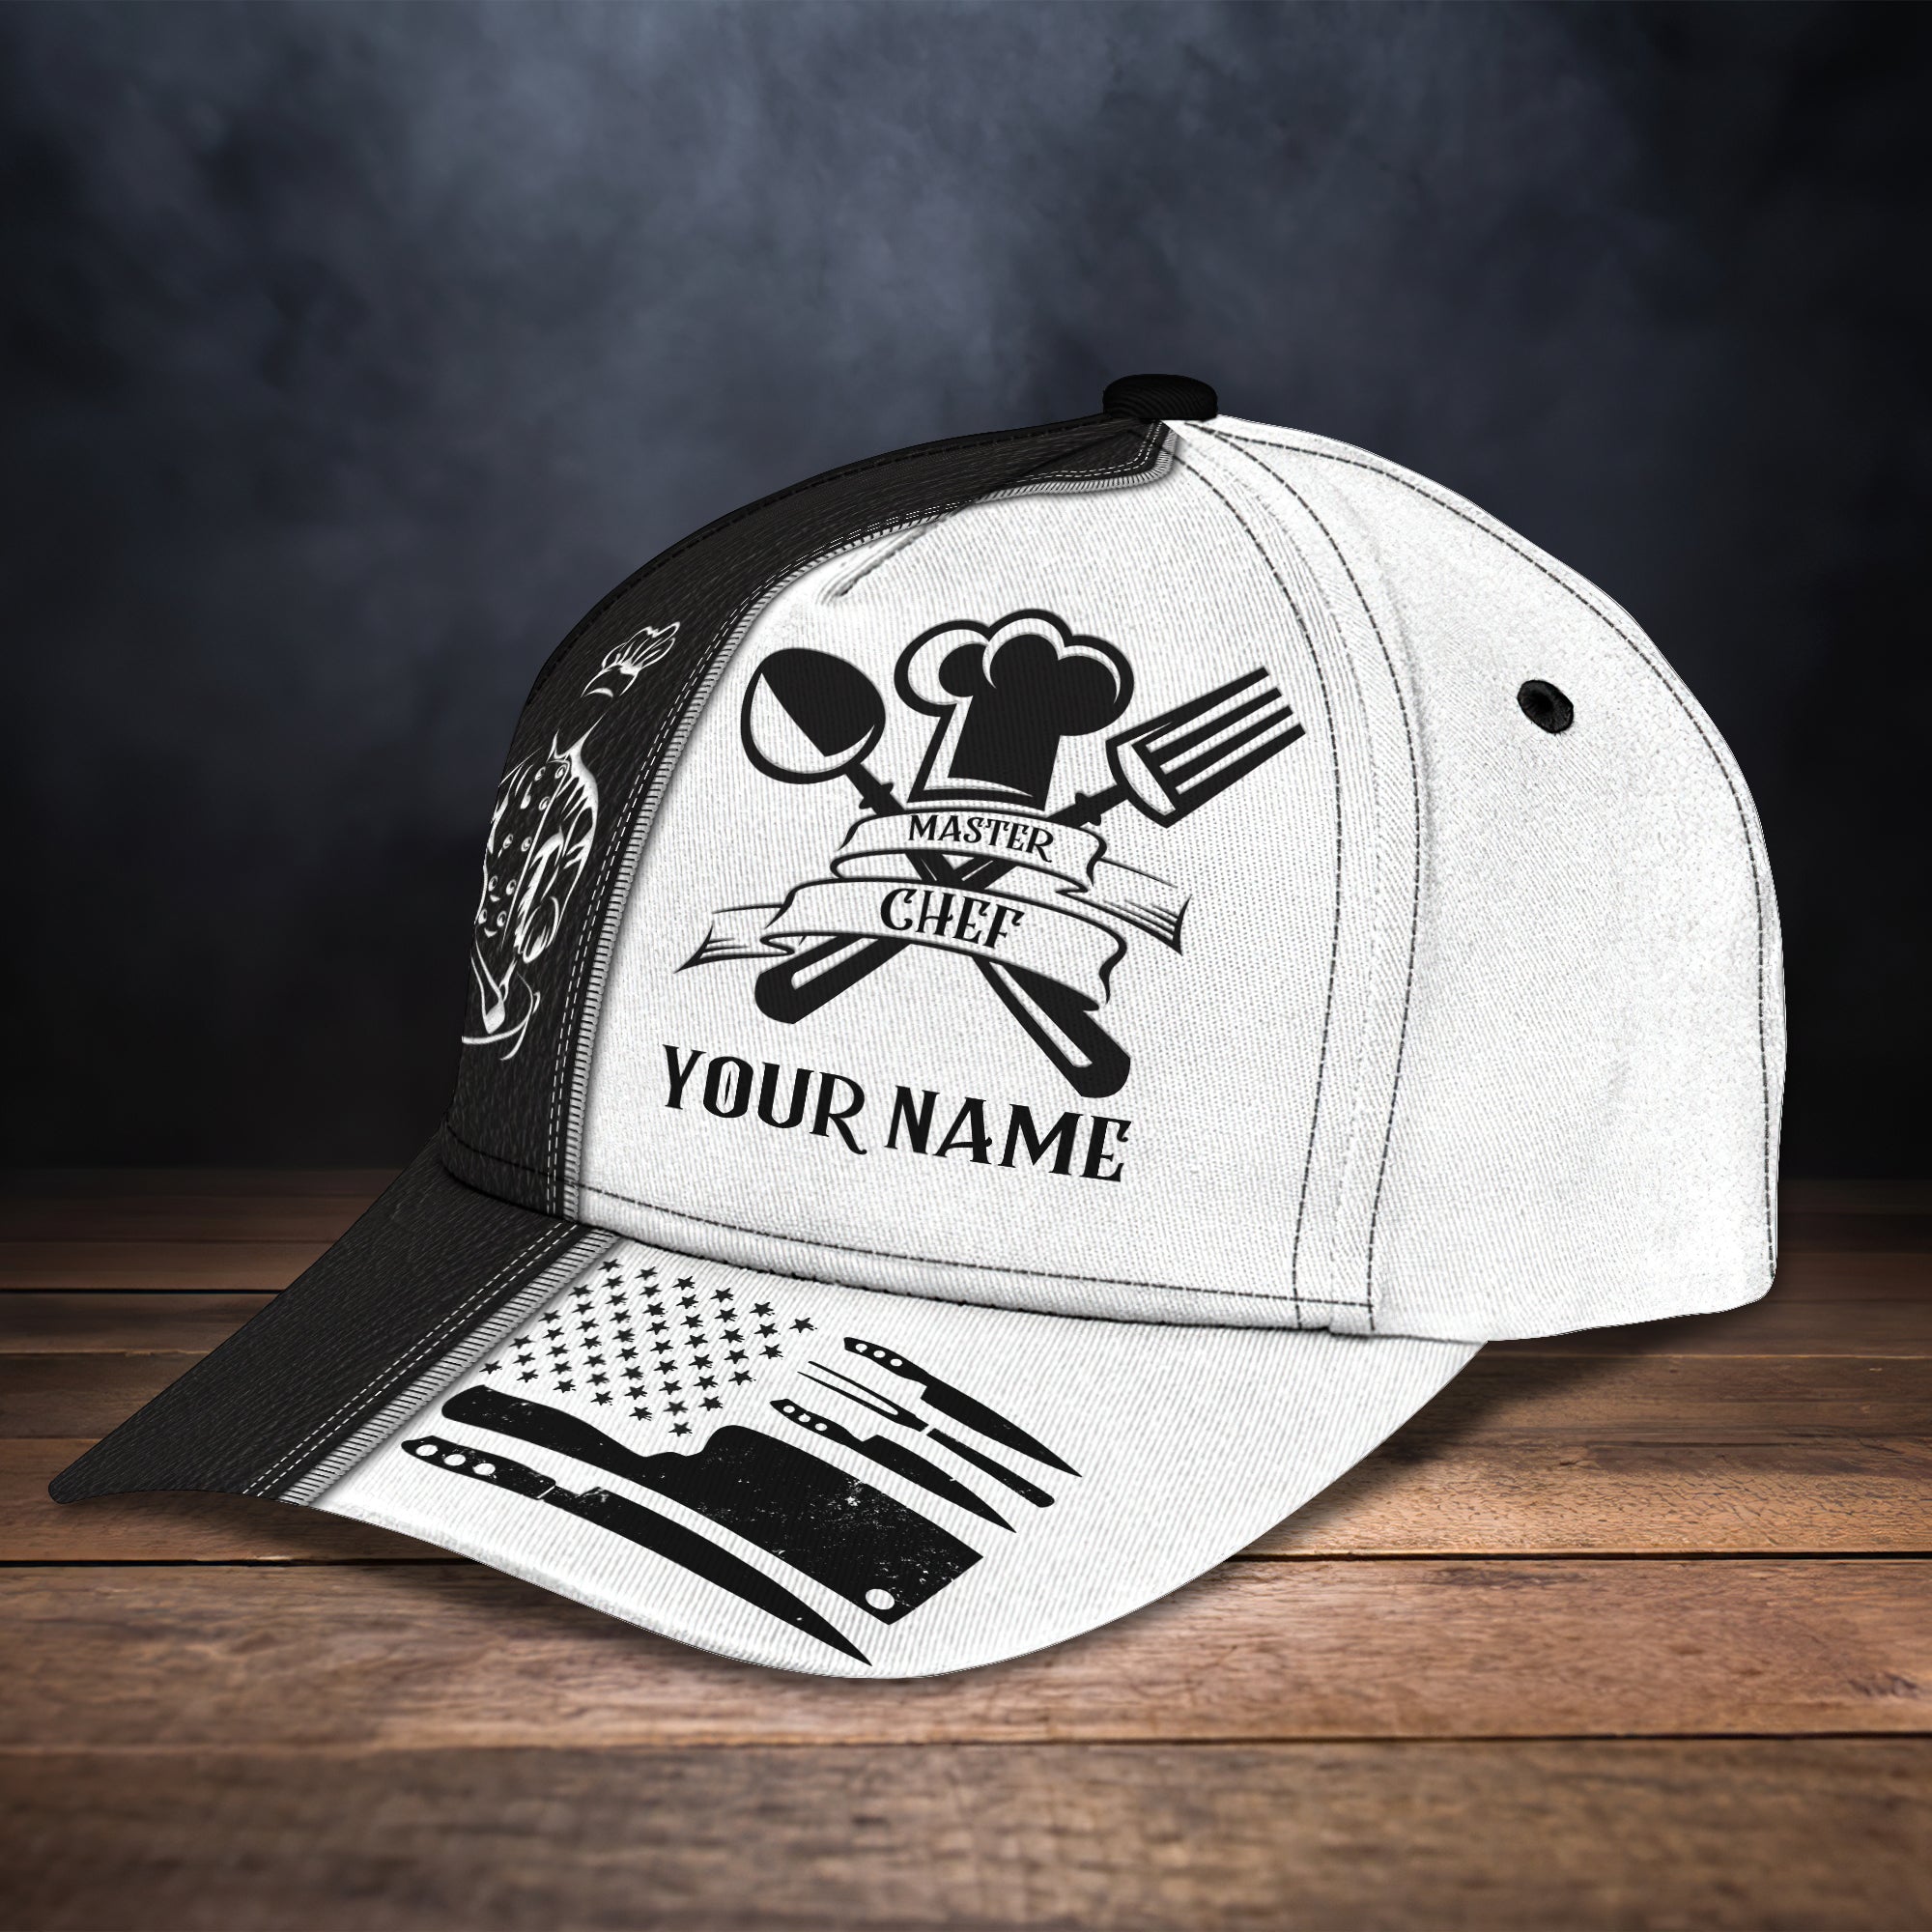 Master chef - Personalized Name Cap - Lst149